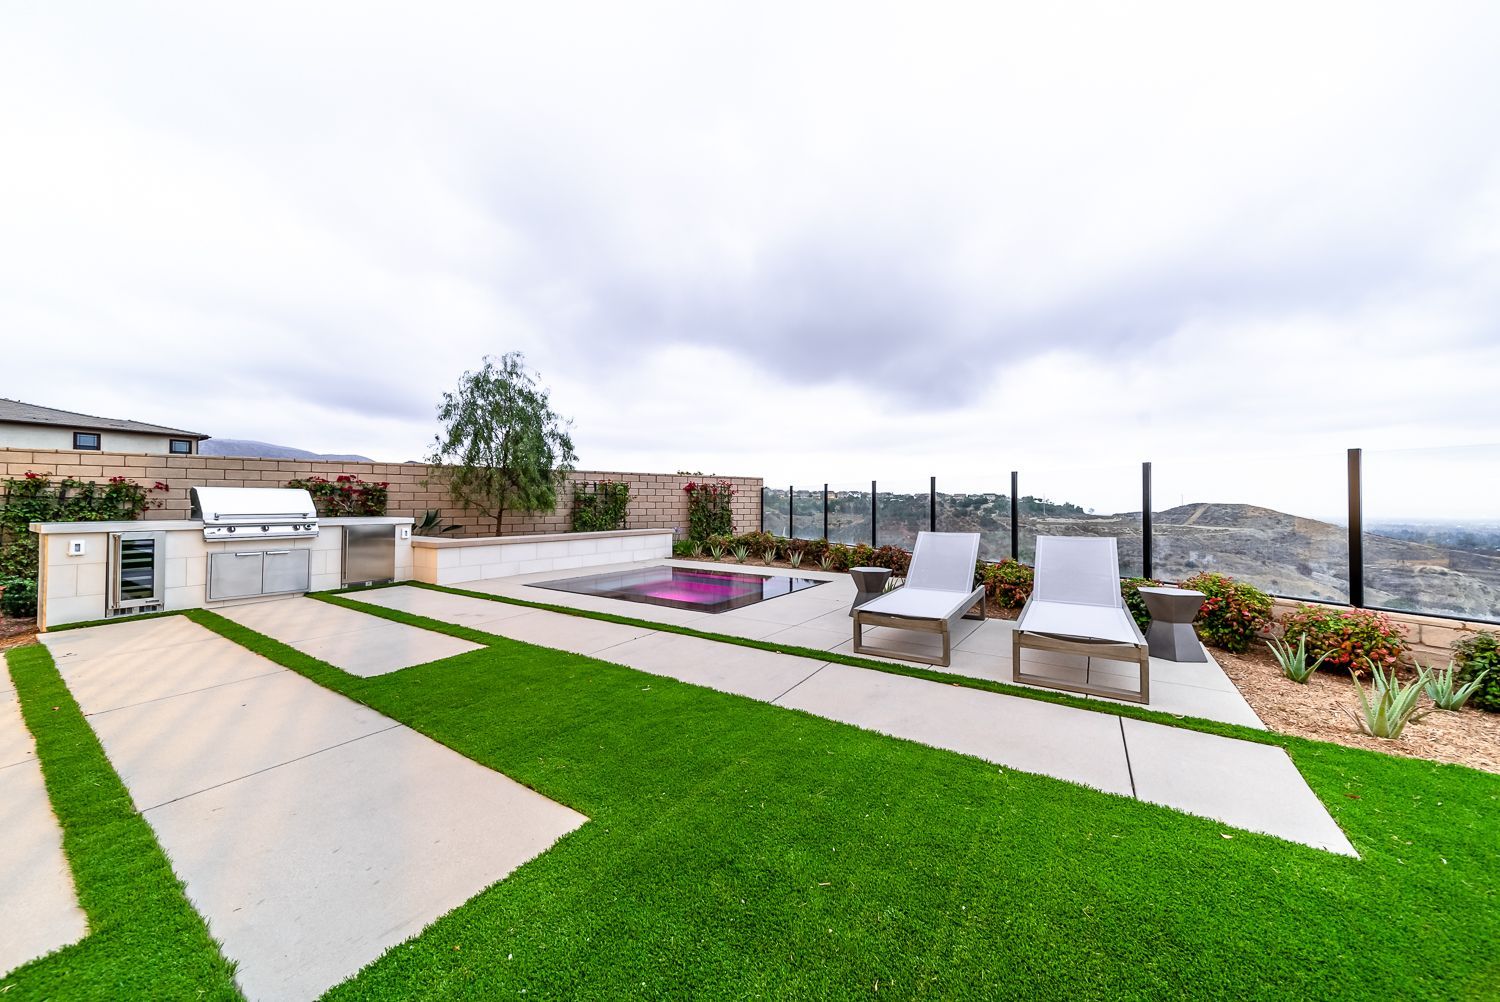 Luxury spa and outdoor living space by Westmod. Location: Chatsworth, CA